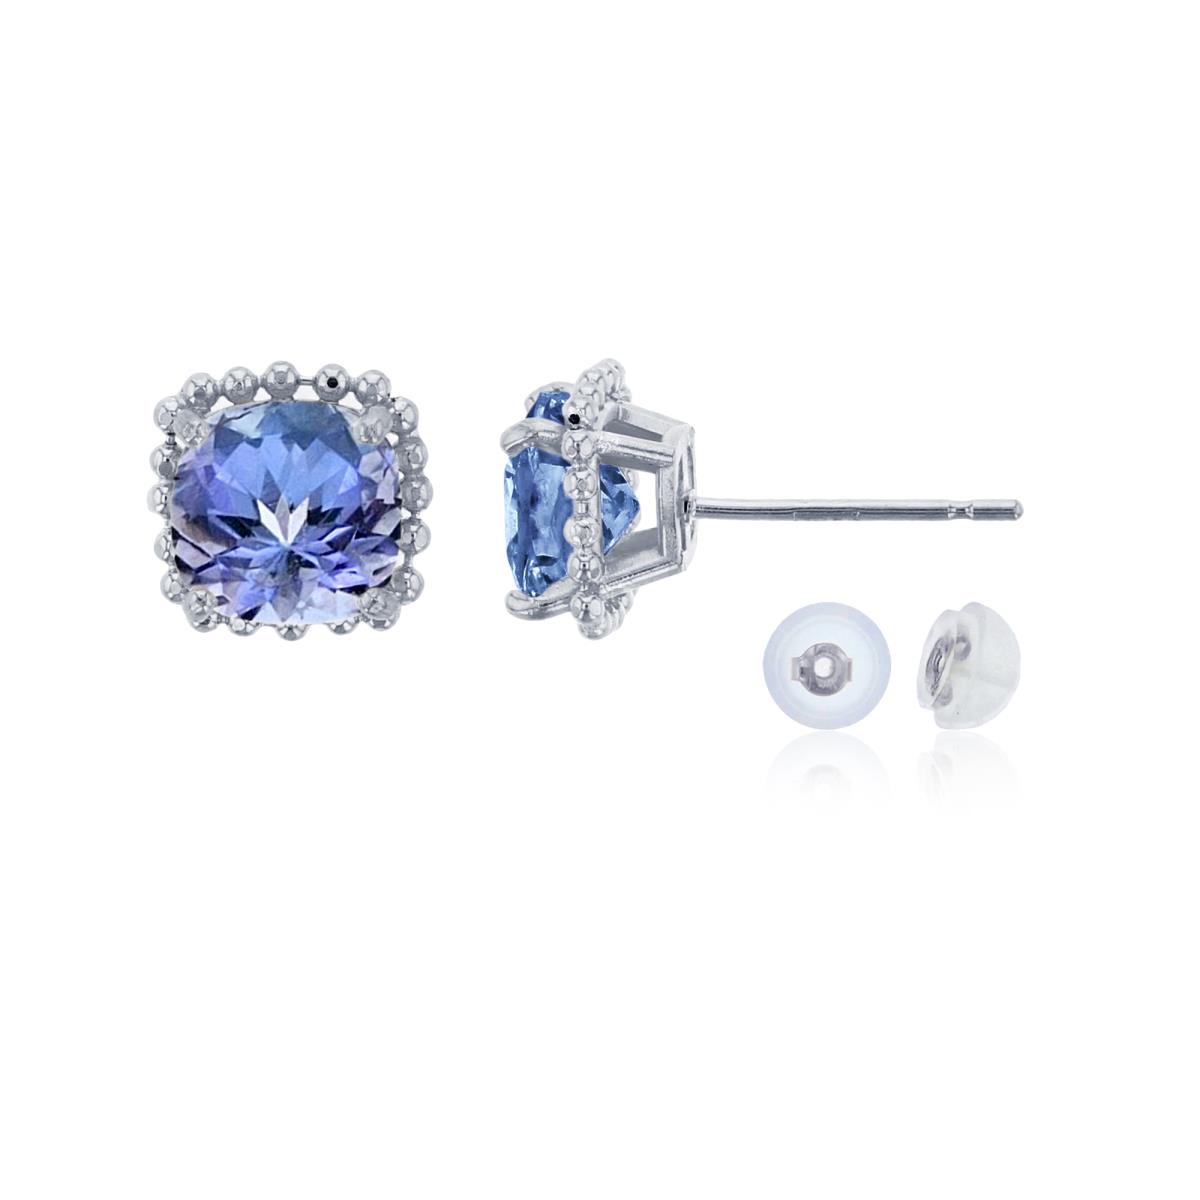 10K White Gold 6x6mm Cushion Cut Tanzanite Bead Frame Stud Earring with Silicone Back